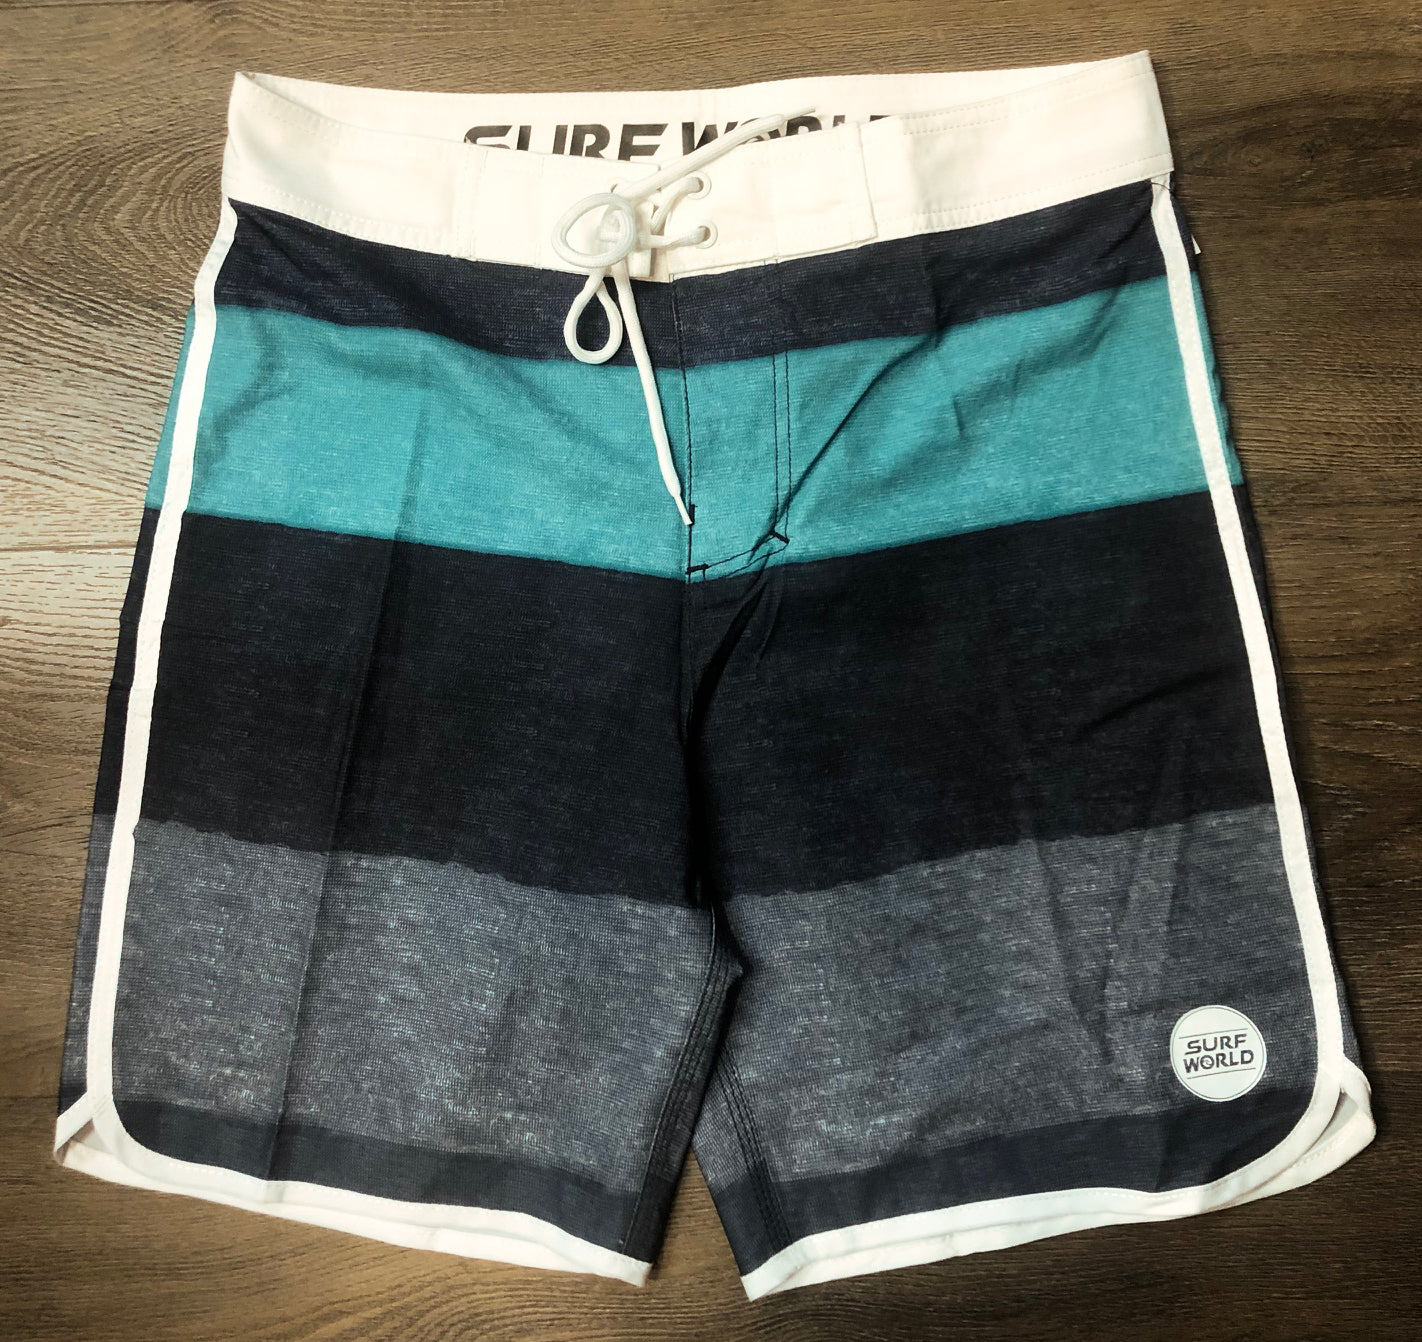 Surf World Ocean Mile Boardshorts - The Surf World Collection - Navy Teal Mens Boardshorts Nvy/Teal